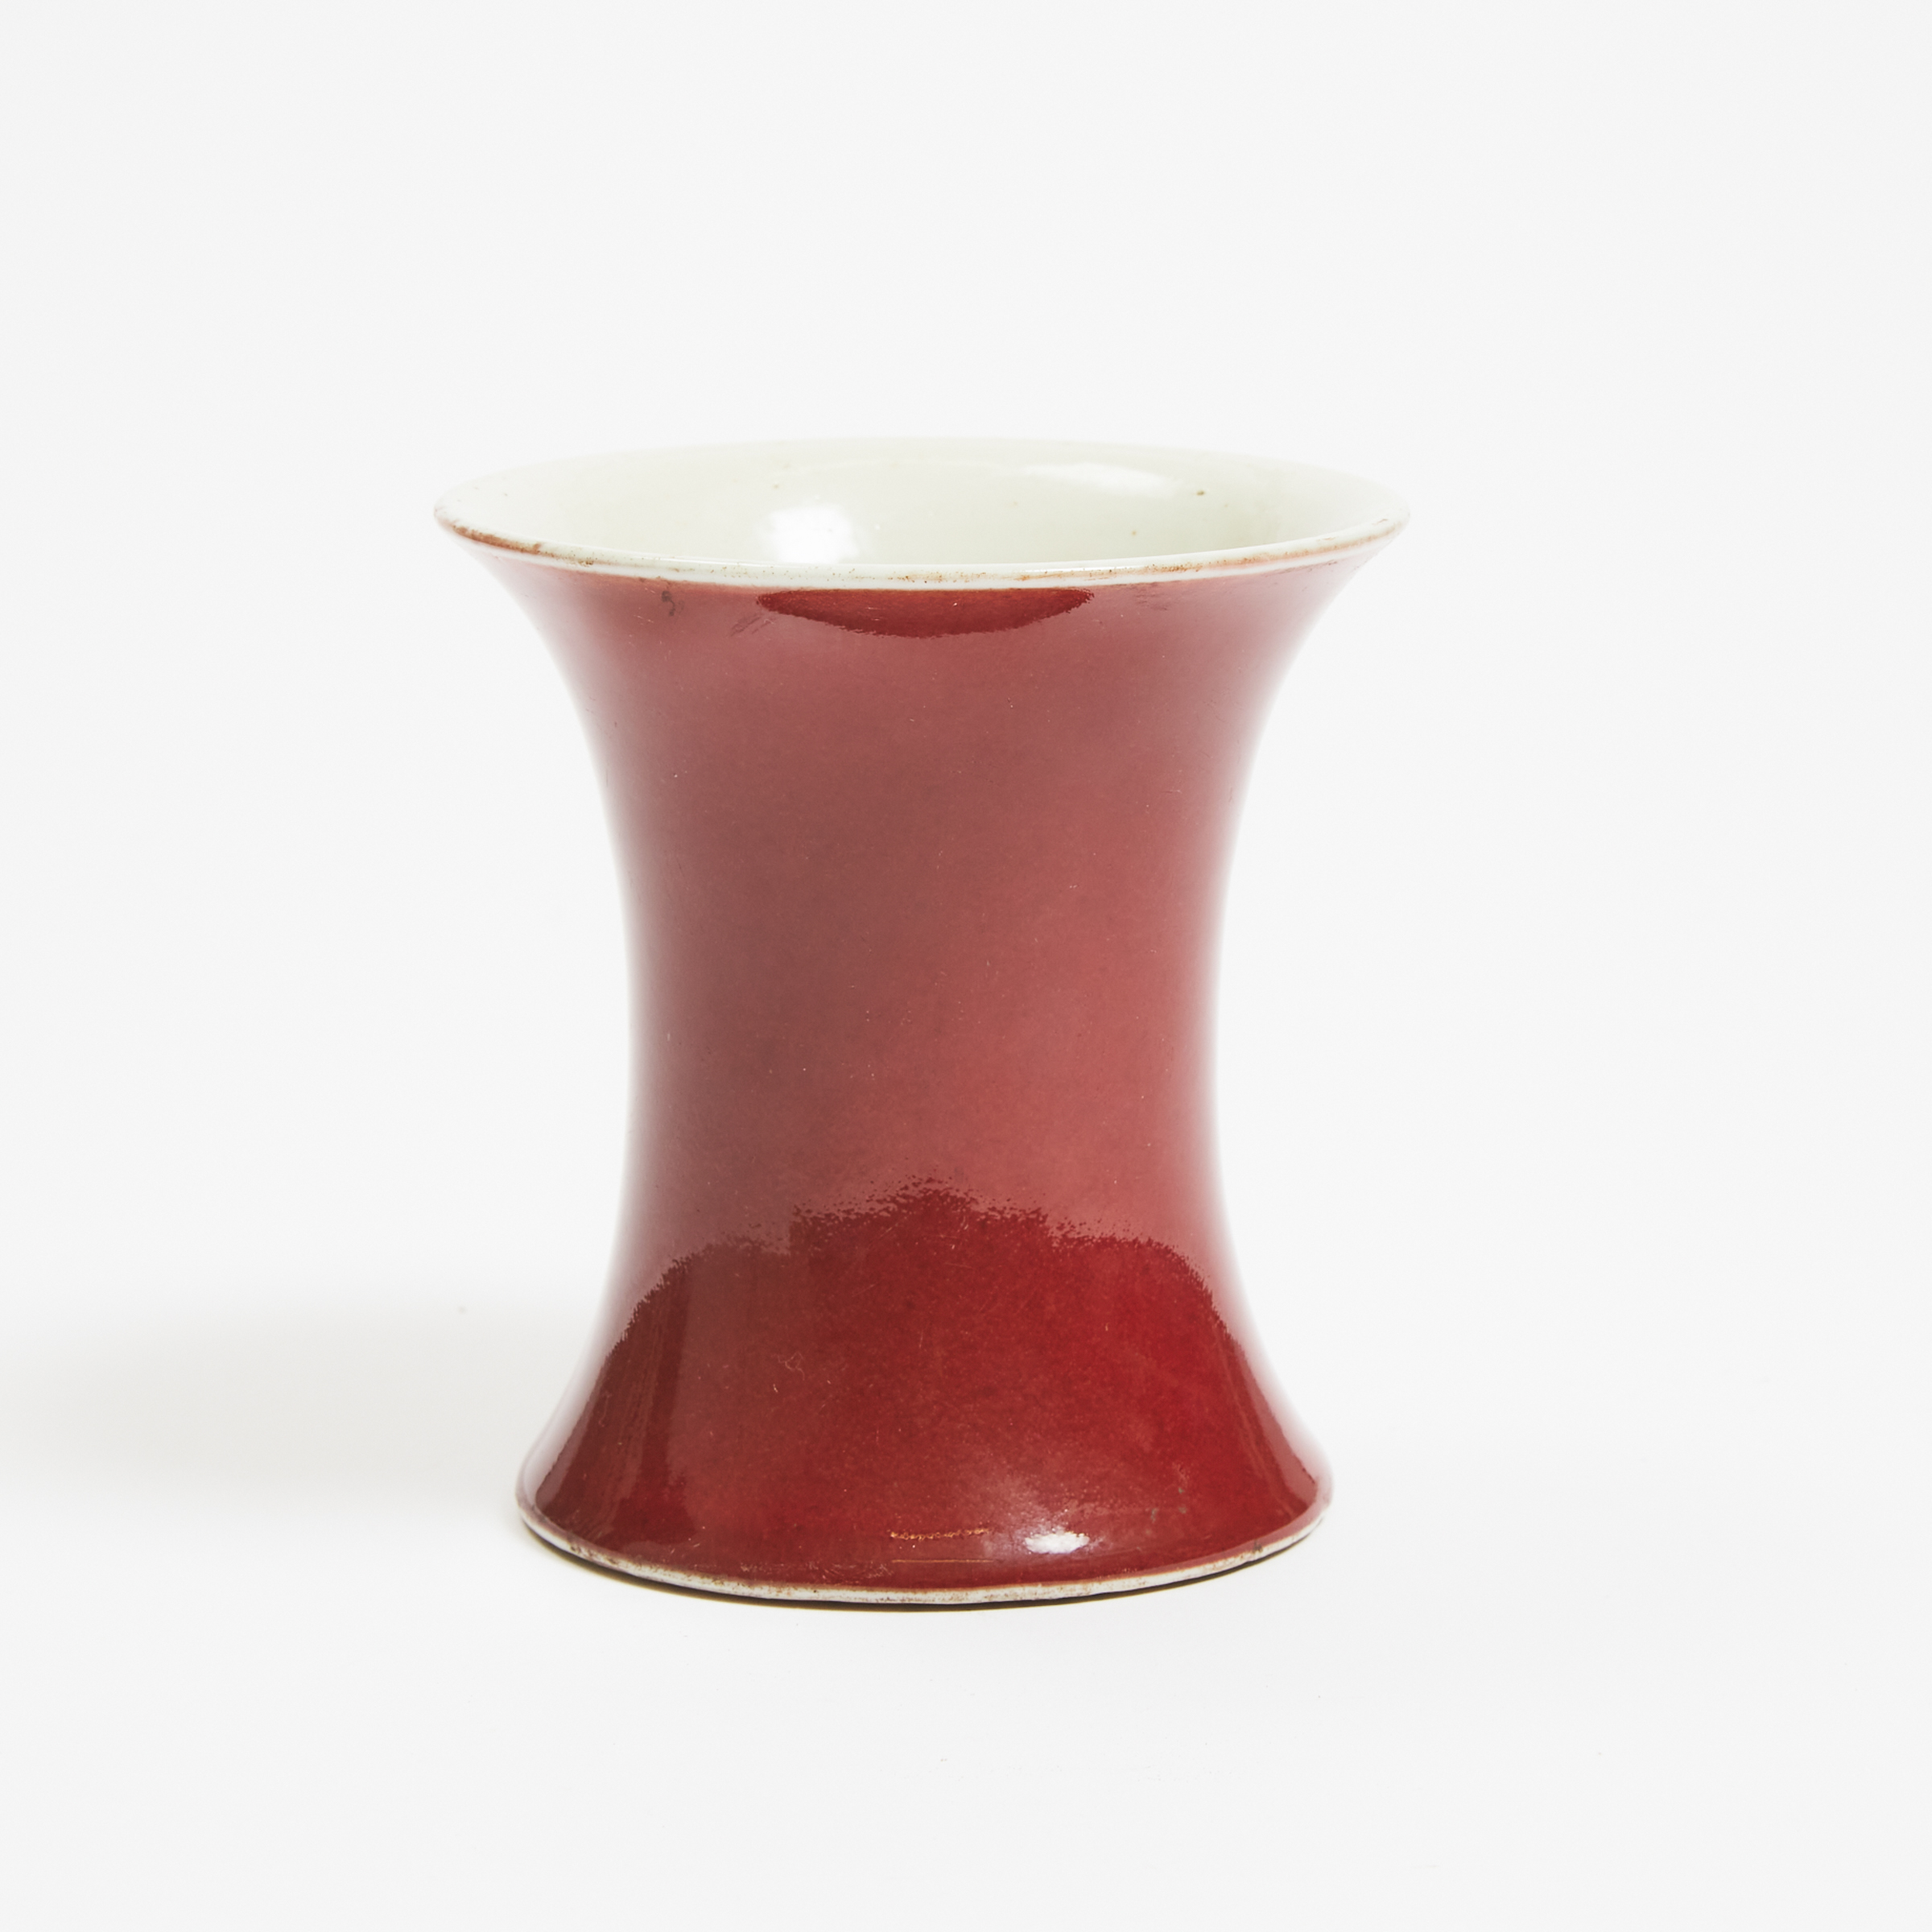 A Small Waisted Copper-Red Vase, 19th Century